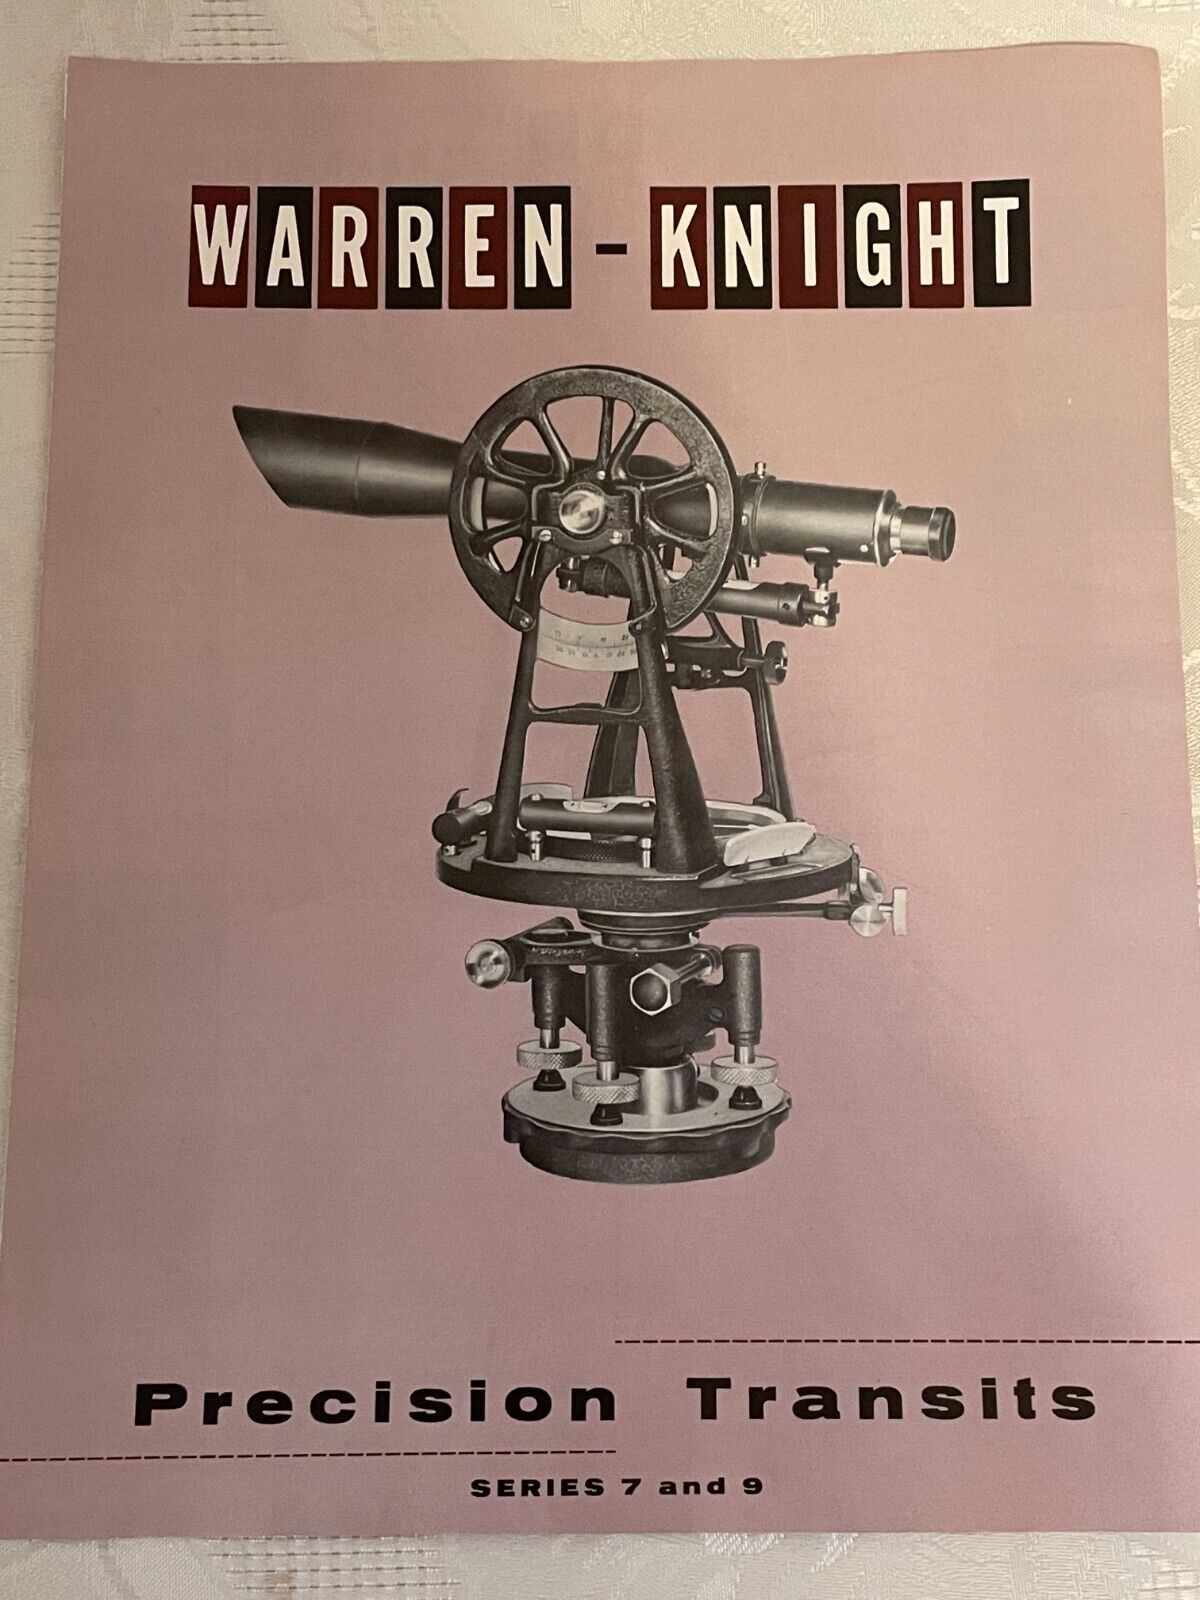 Vintage Warren-Knight Precision Transits Series 7 & 9 Brochure w Specifications